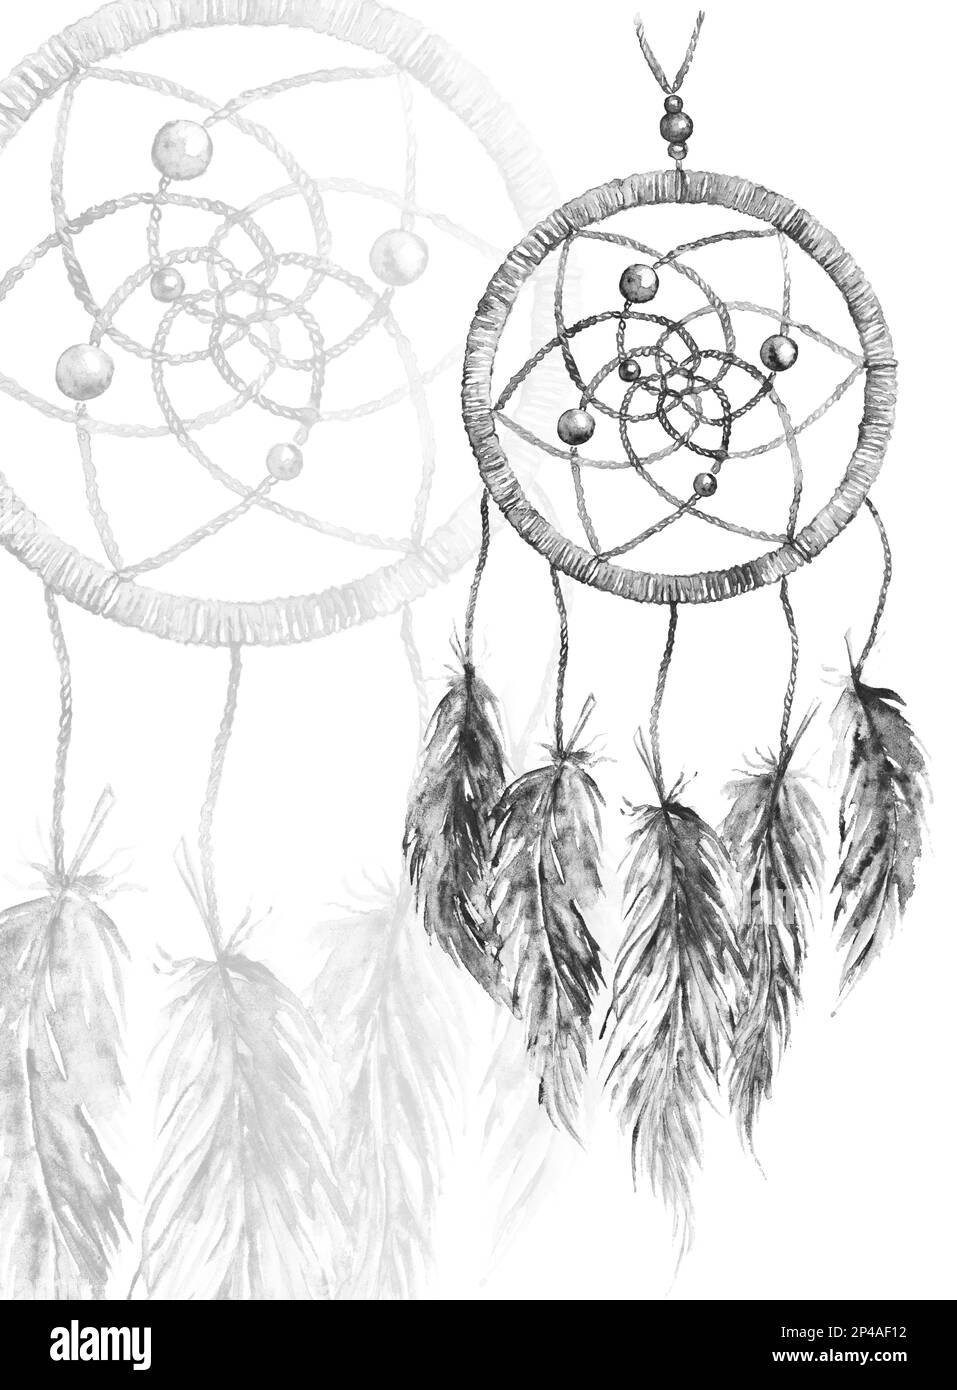 Watercolor monochrome ethnic tribal hand made feather dreamcatcher. Stock Photo